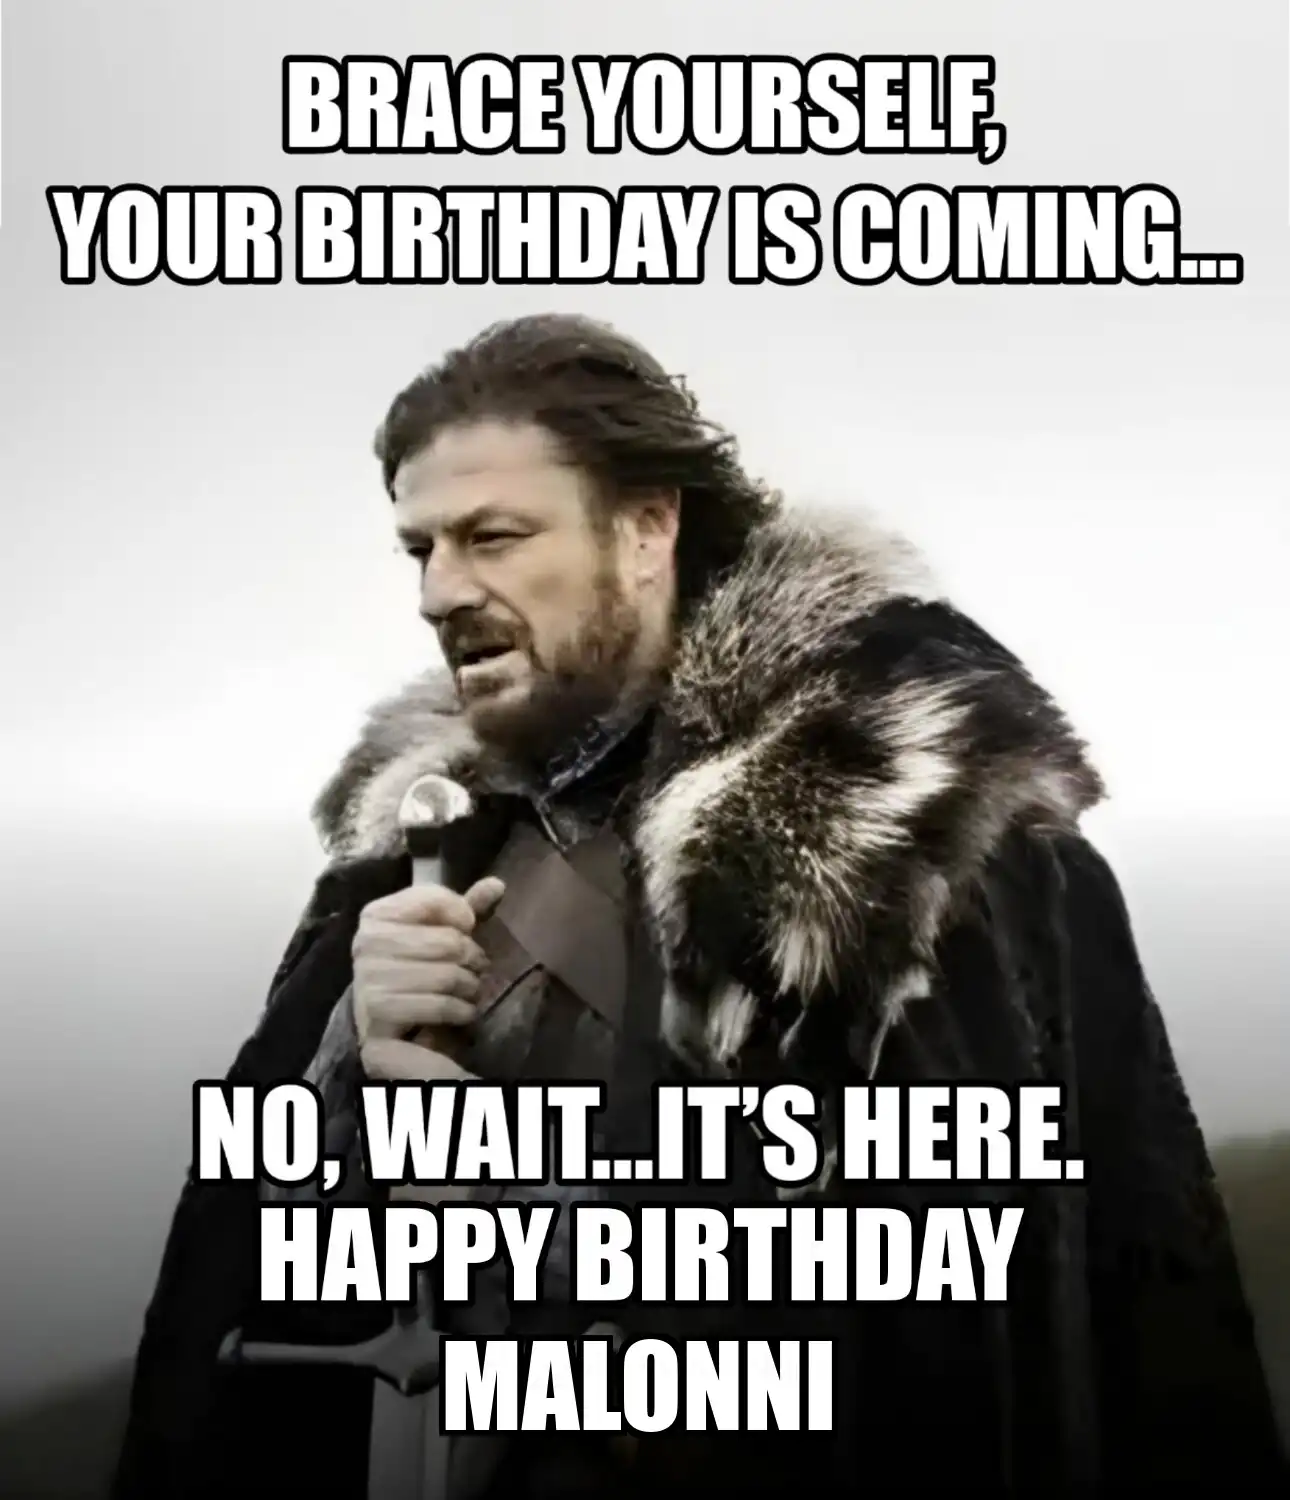 Happy Birthday Malonni Brace Yourself Your Birthday Is Coming Meme